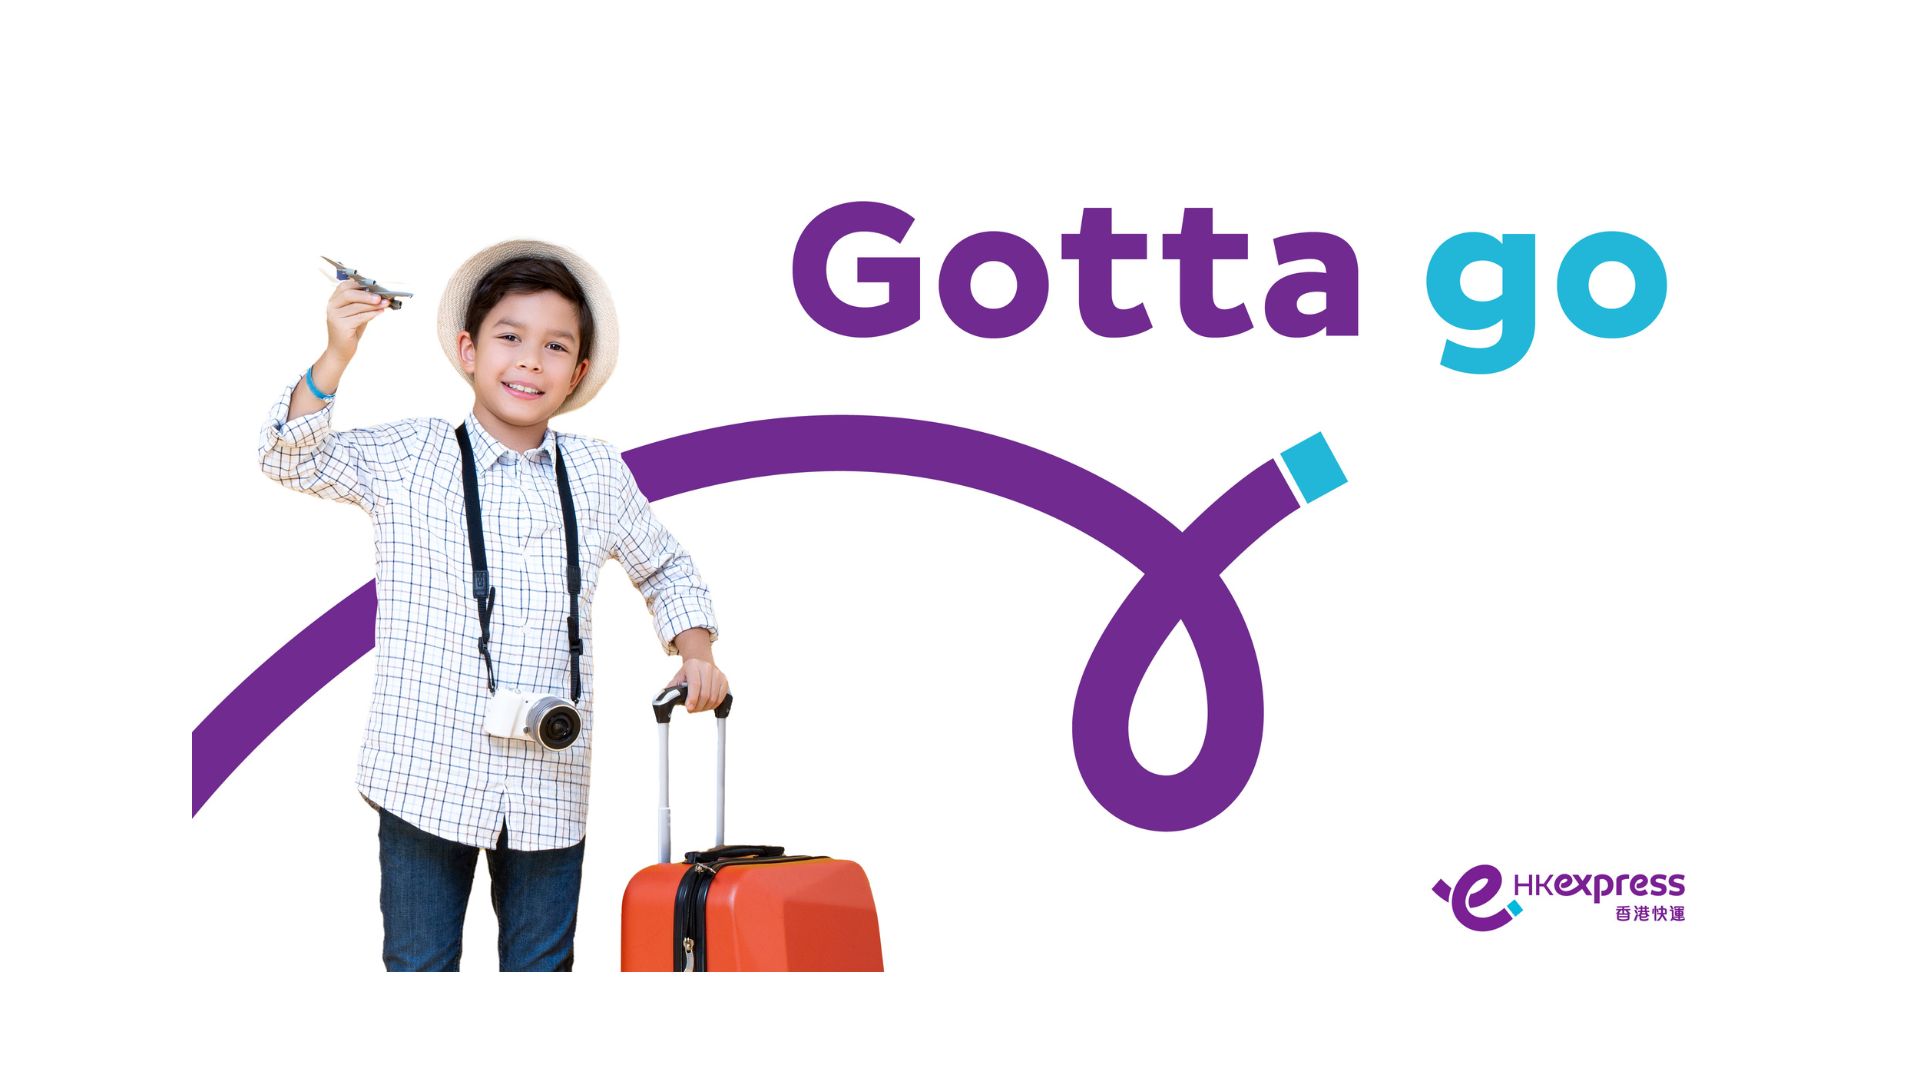 HK Express Launches “Children’s Seat​ing Option​​ ​Half Fare Offer”